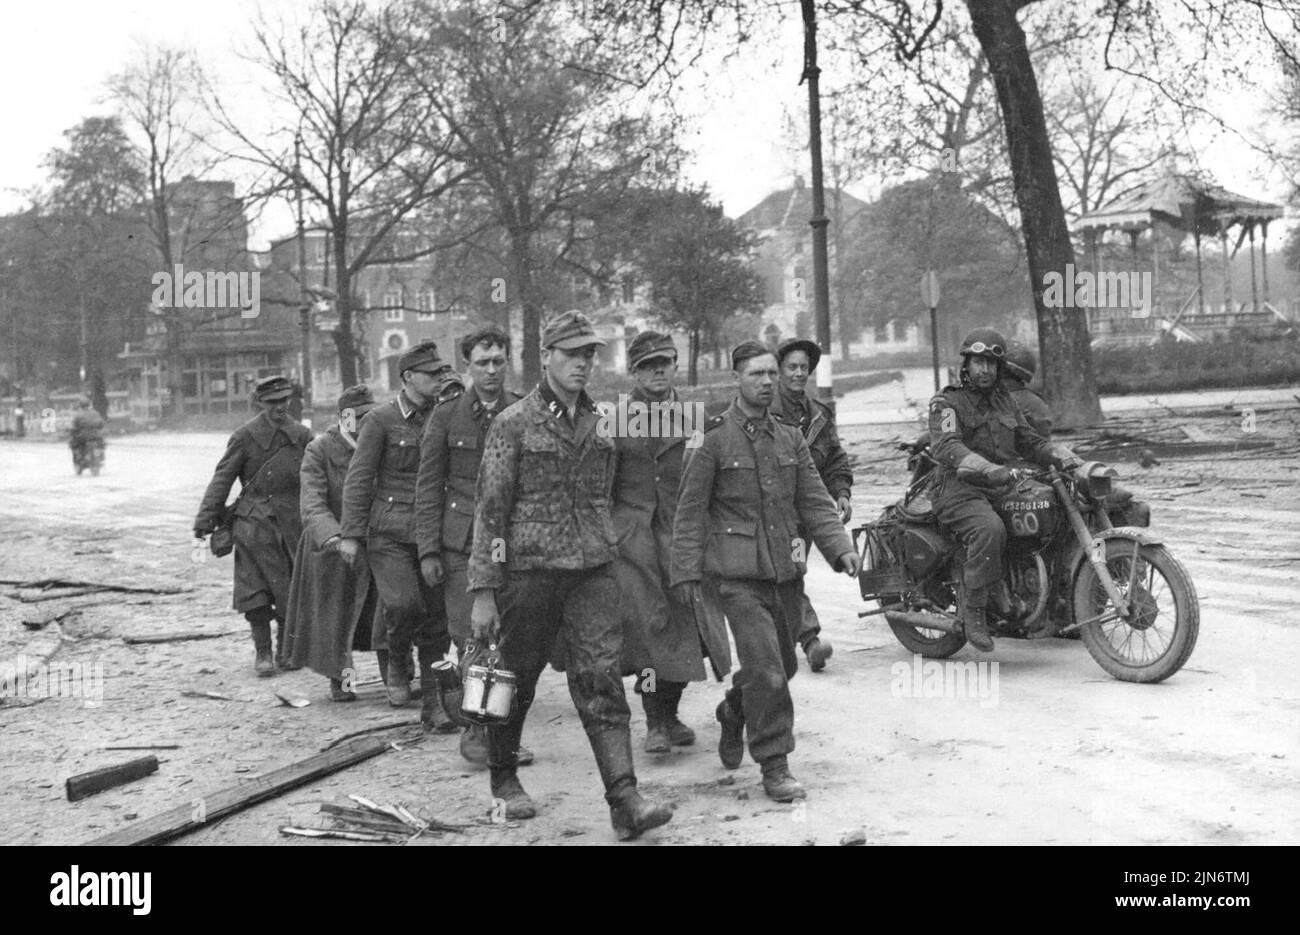 West Ridings Capture Arnhem -- This time it is the Germans who are being marched out of Arnhem - here are the first prisoners captured by the west ridings in the town.The 49th (west riding) division fighting under Canadian command has captured Arnhem and avenged the battering British airborne troops suffered when they attacked the town last September. April 15, 1945. (Photo by Associated Press Photo). Stock Photo